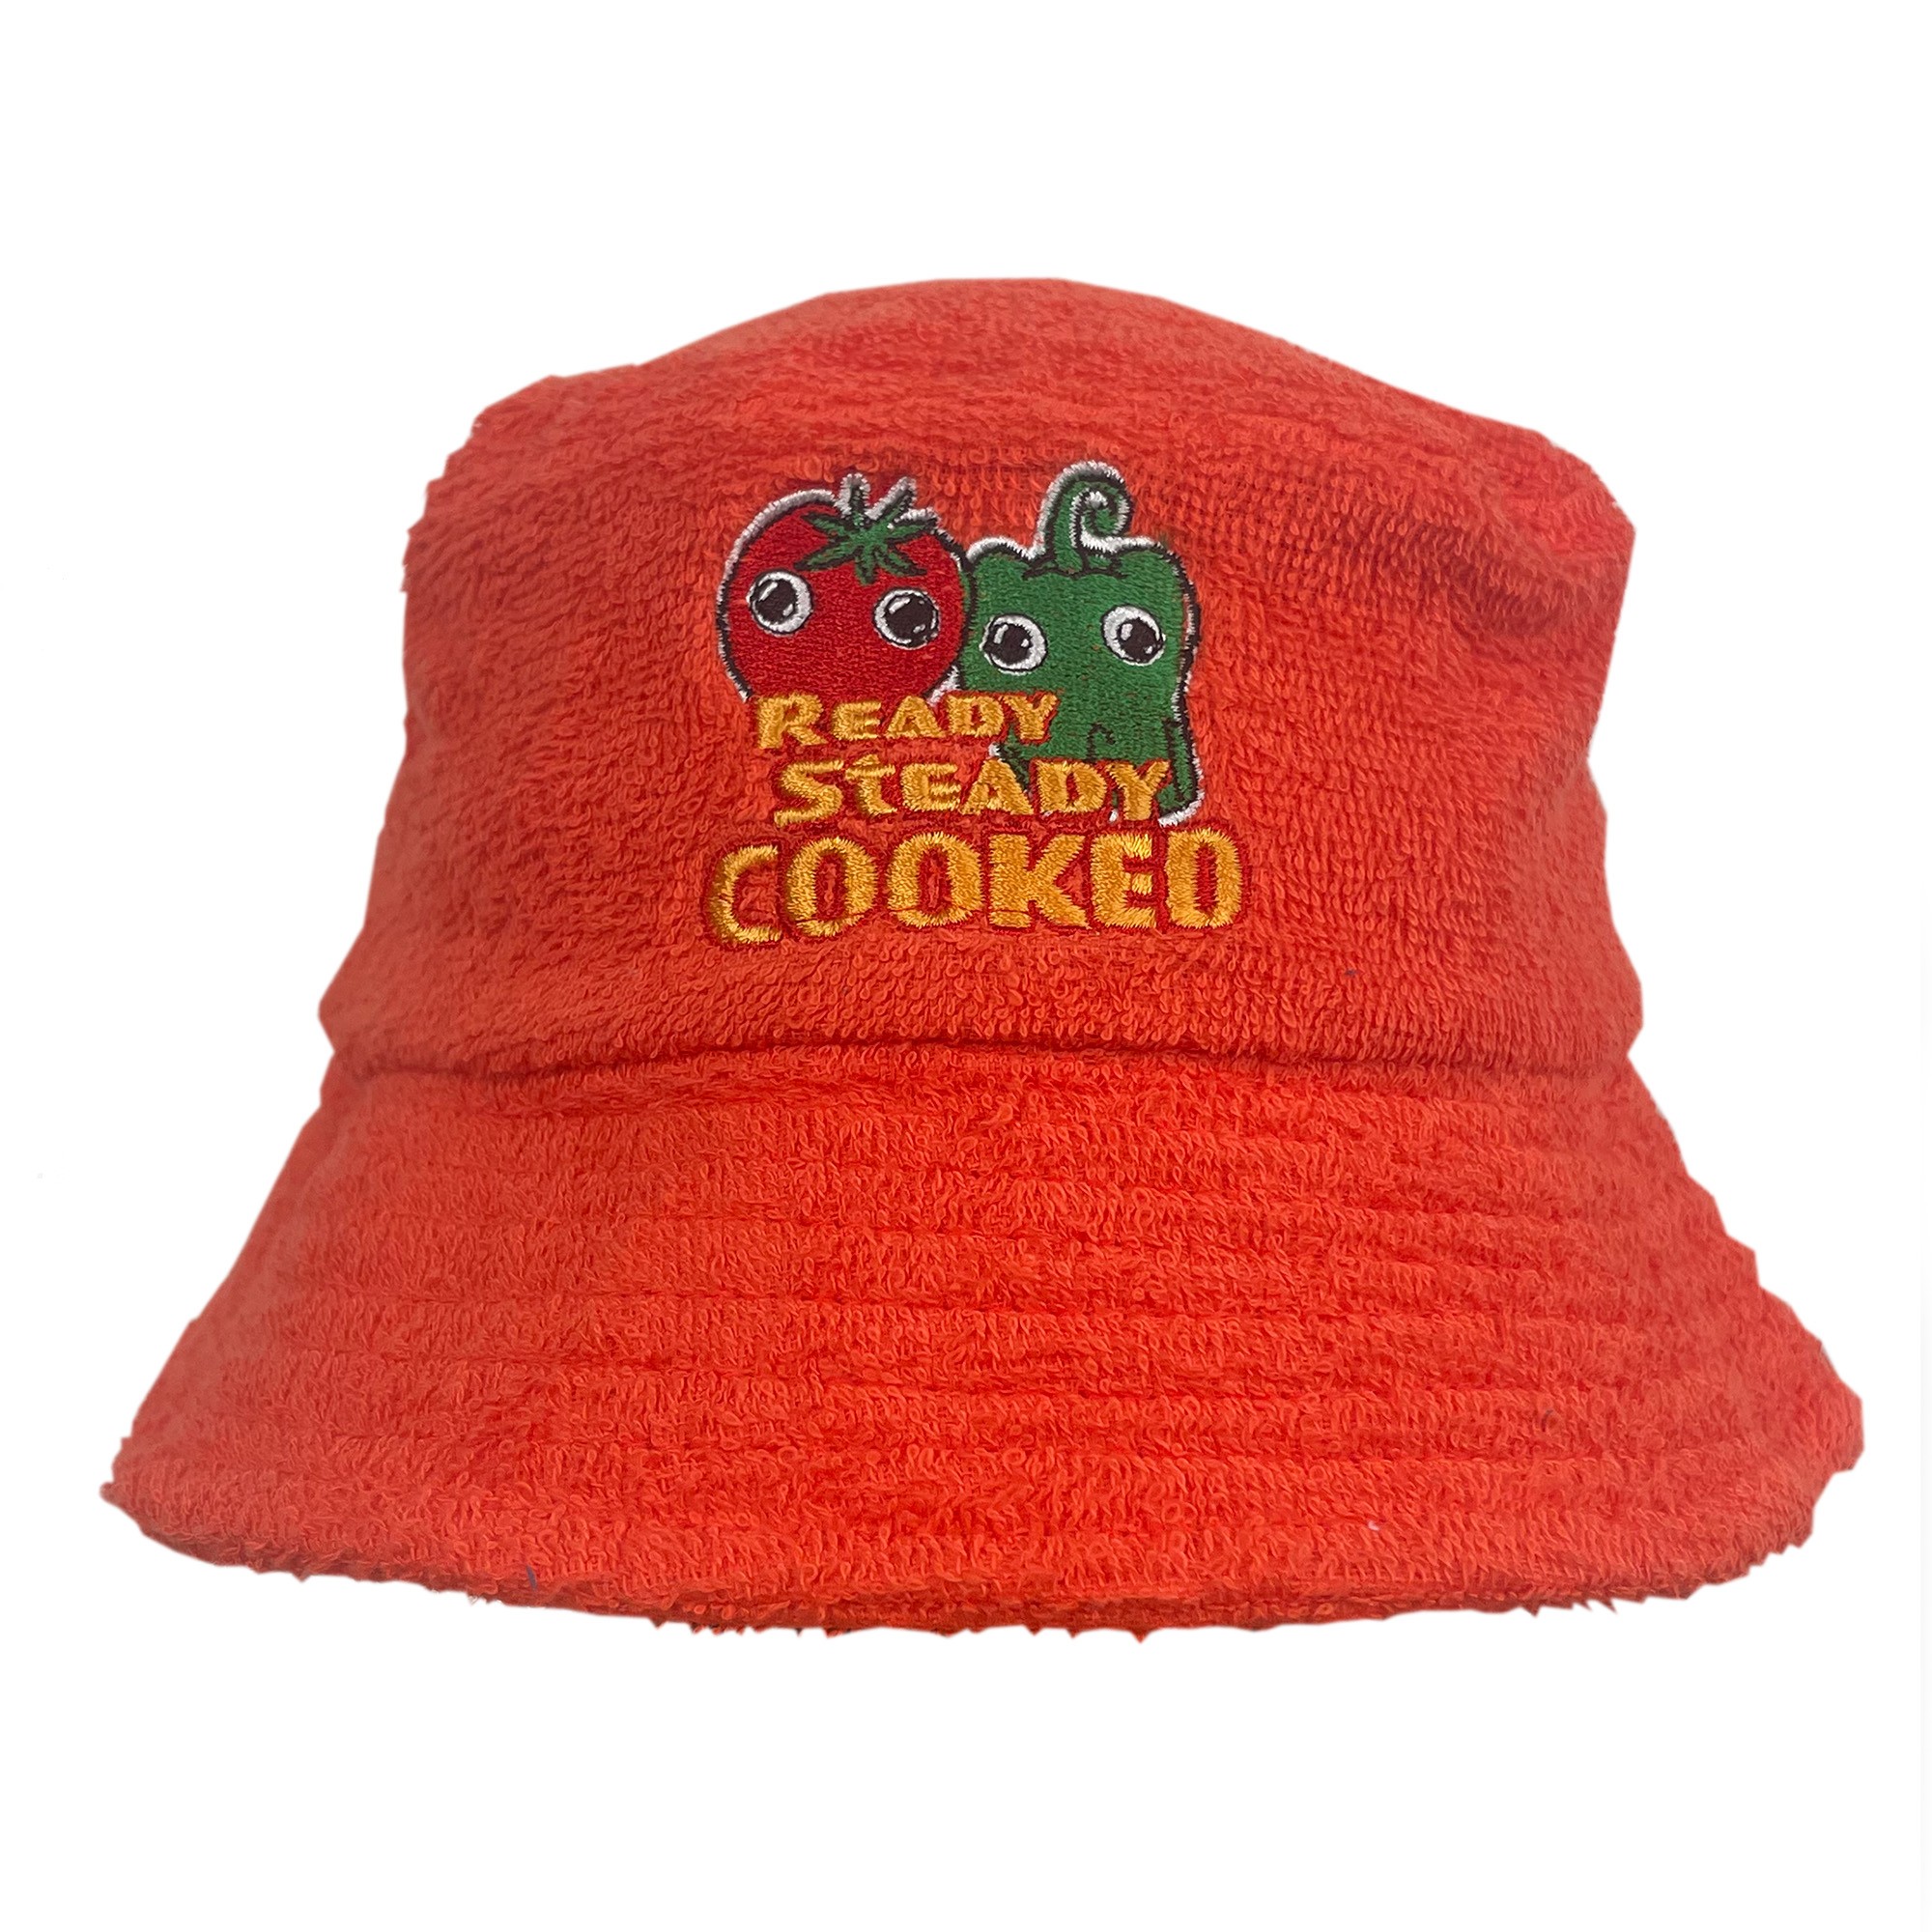 READY STEADY COOKED TERRY TOWEL BUCKET HAT